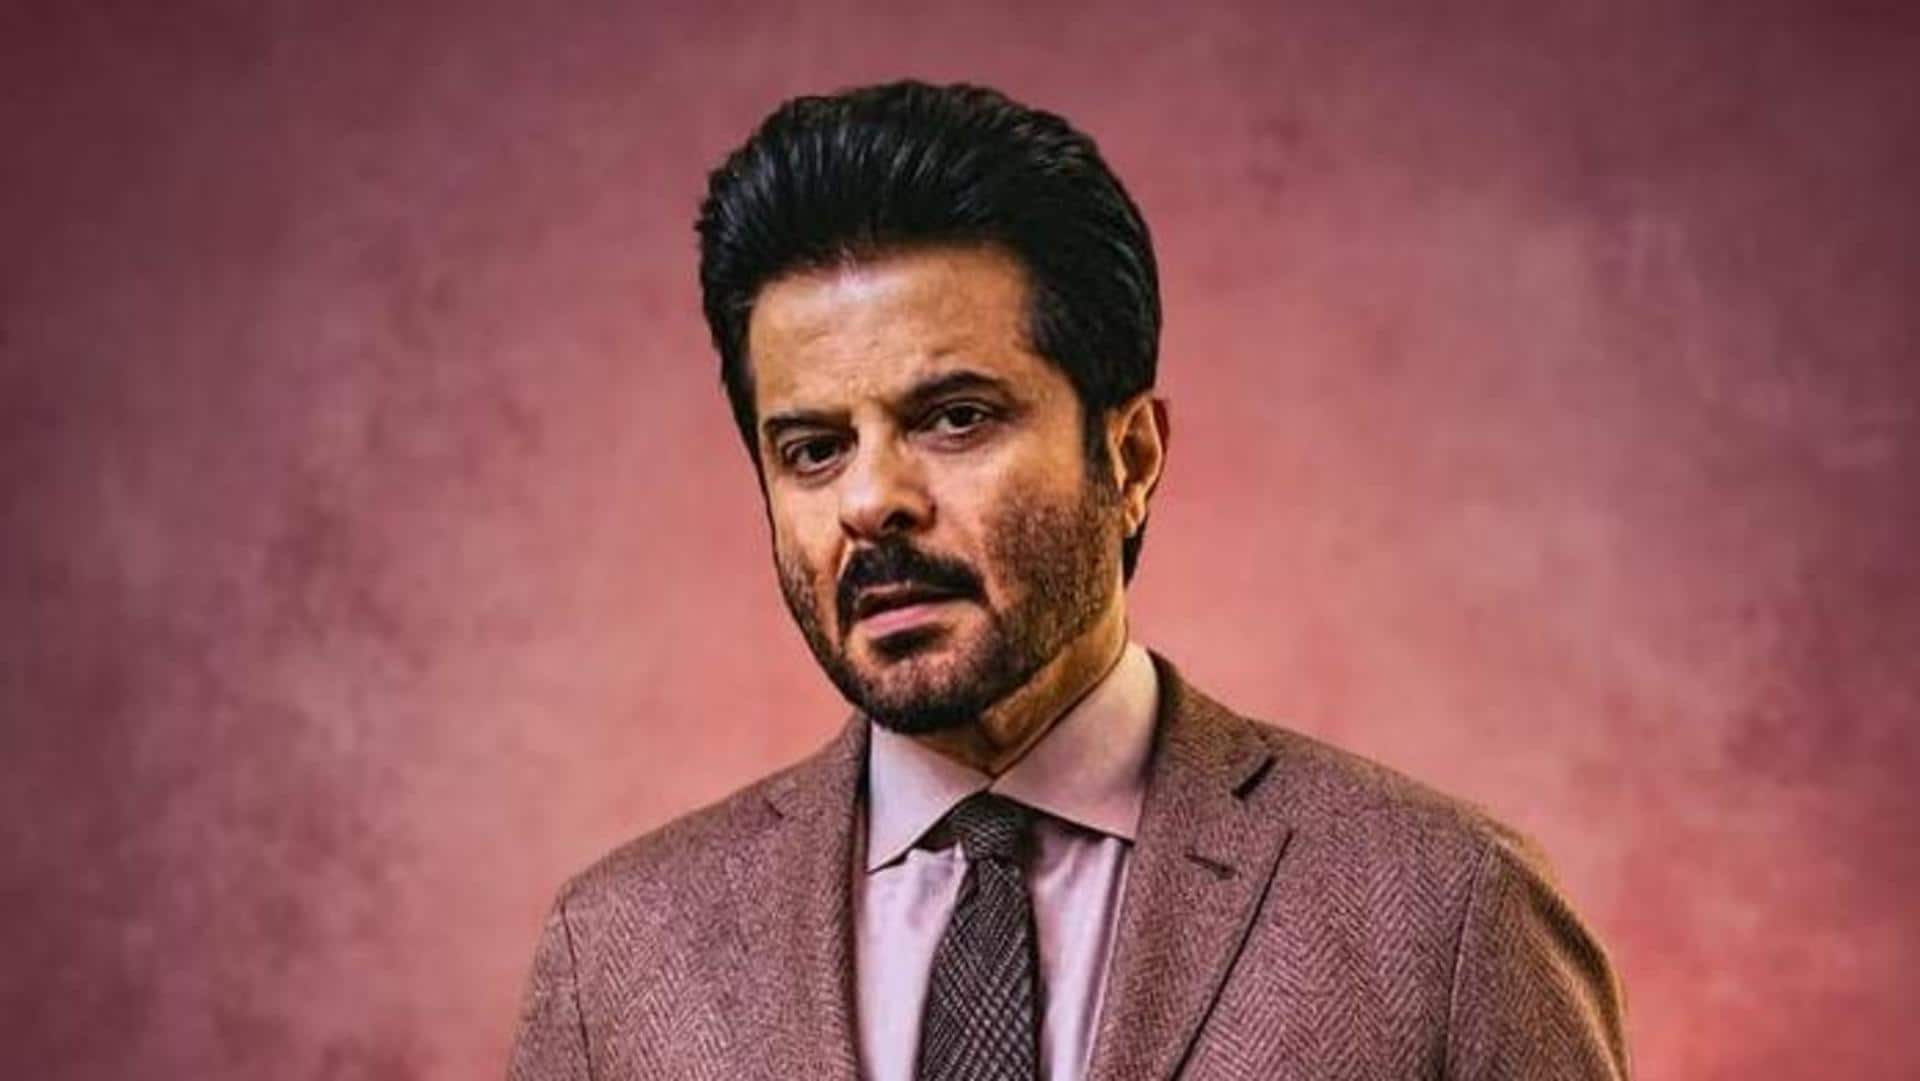 Anil Kapoor's sweet gesture for co-passenger leaves internet in awe